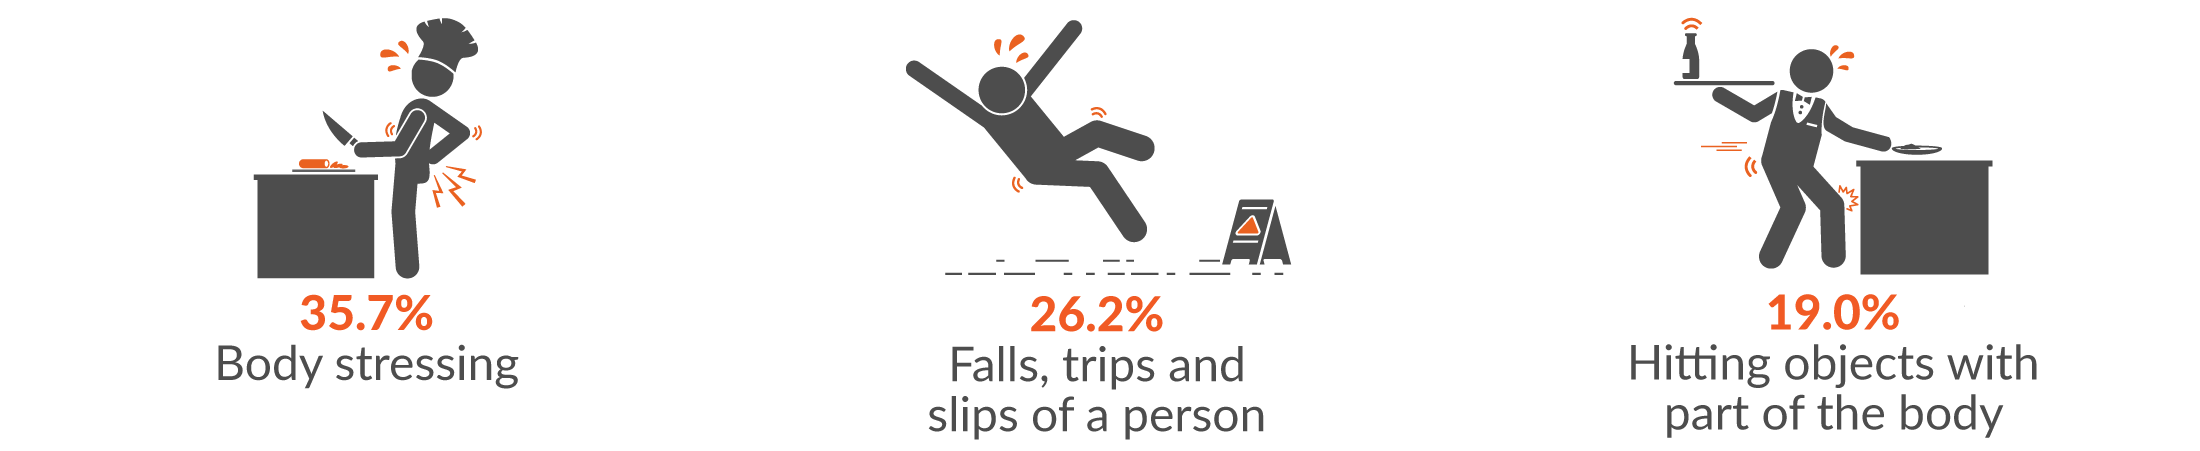 This infographic shows the main three mechanisms of serious injury for Accommodation, Cafes and Restaurants claims were 35.7% body stressing; 26.2% falls, trips and slips of a person; and 19% hitting objects with part of the body.